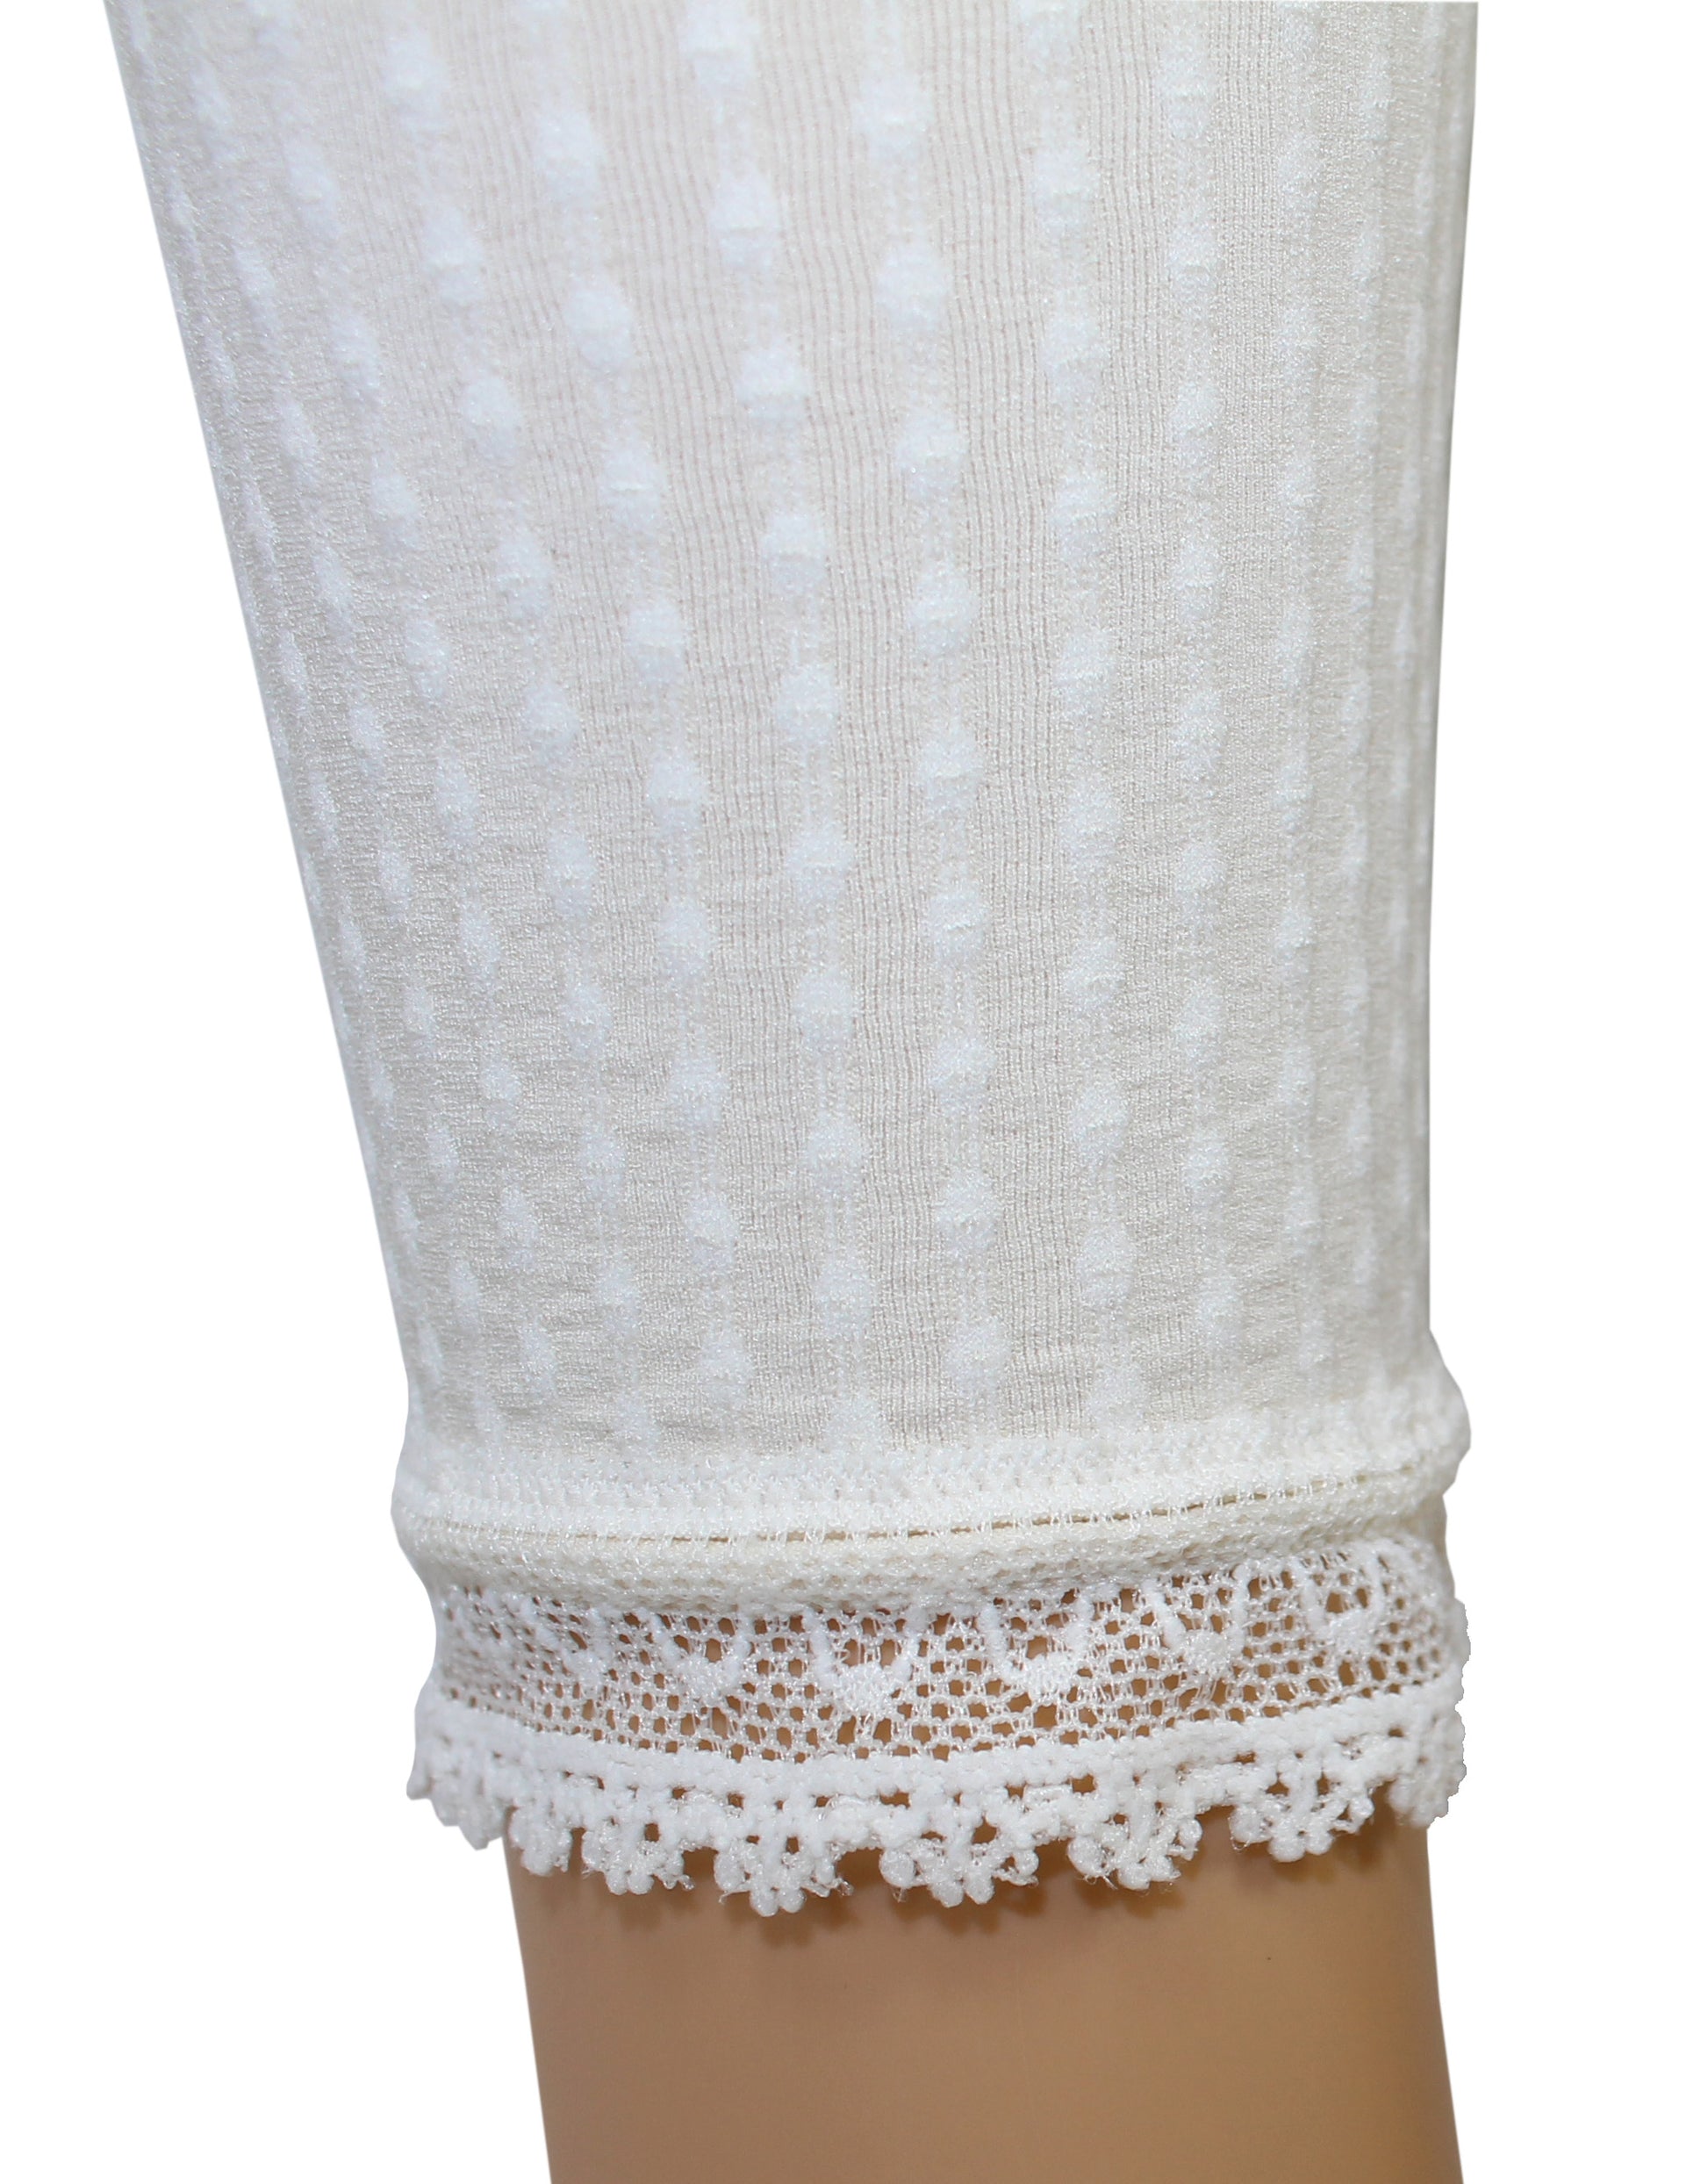 Omsa Caramel Pantacollant - Soft opaque ivory footless tights with a textured floral pinstripe pattern and lace trim cuff.